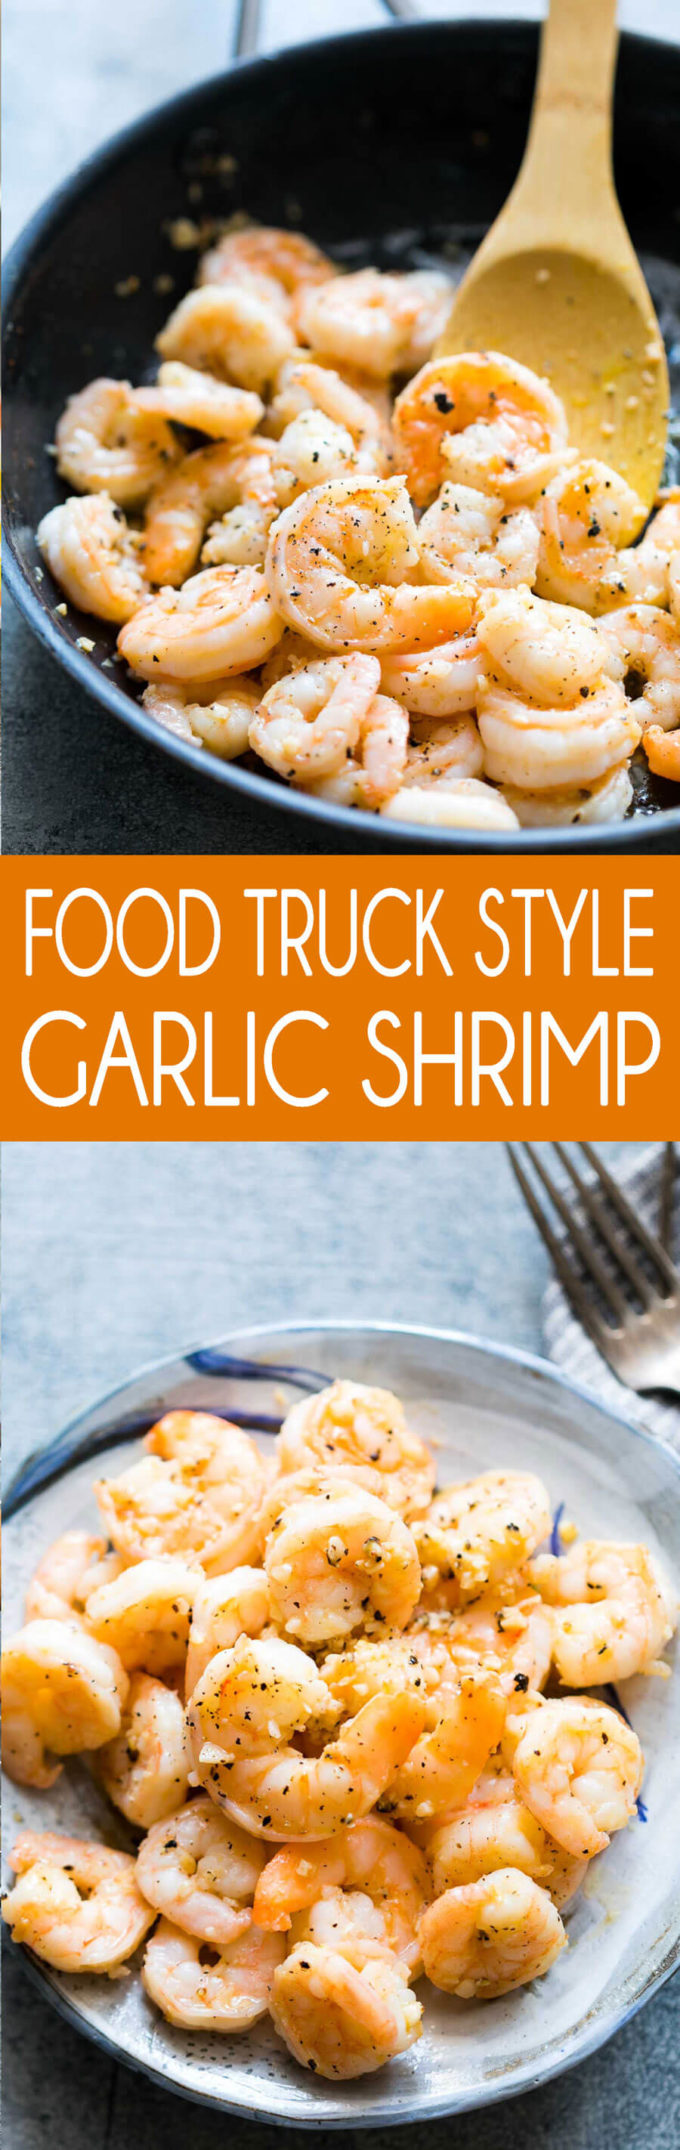 Food truck style garlic shrimp, big juicy shrimp sauted in garlic butter for the ultimate island meal